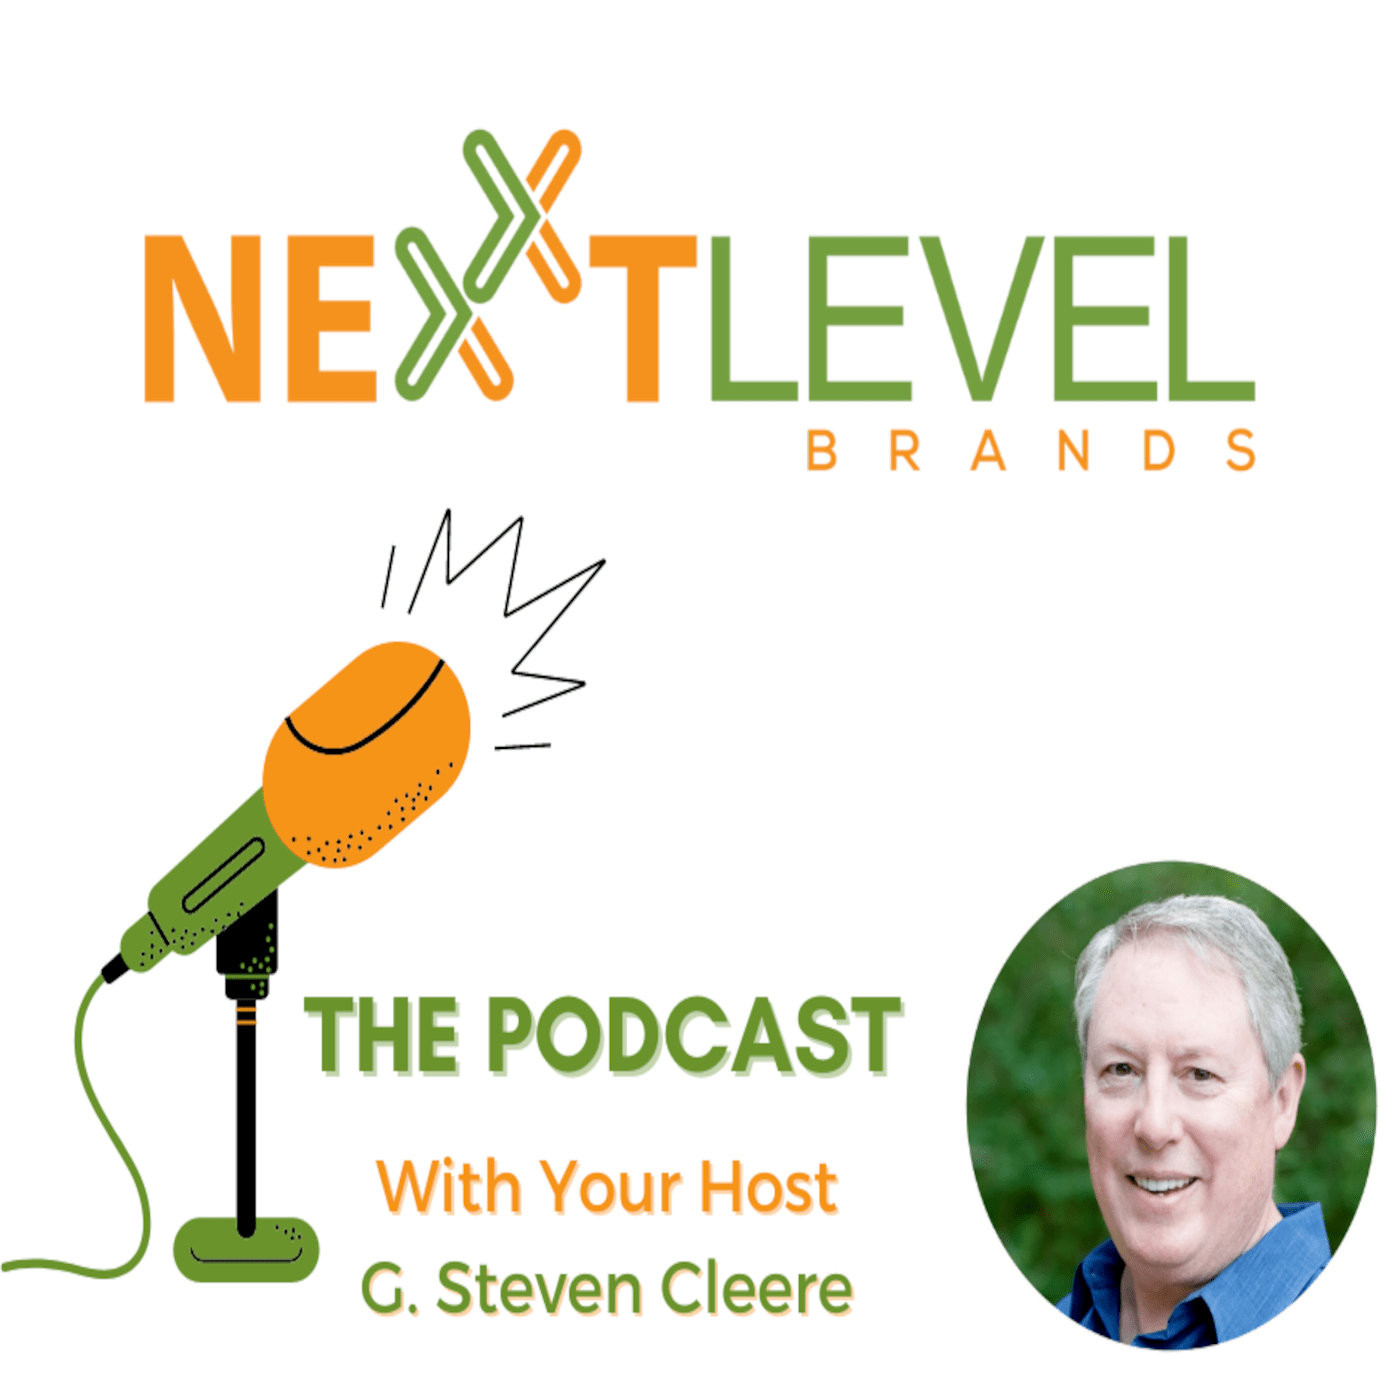 Just Like Butter - Buttermilk Creative on the NexxtLevel Brands Podcast!